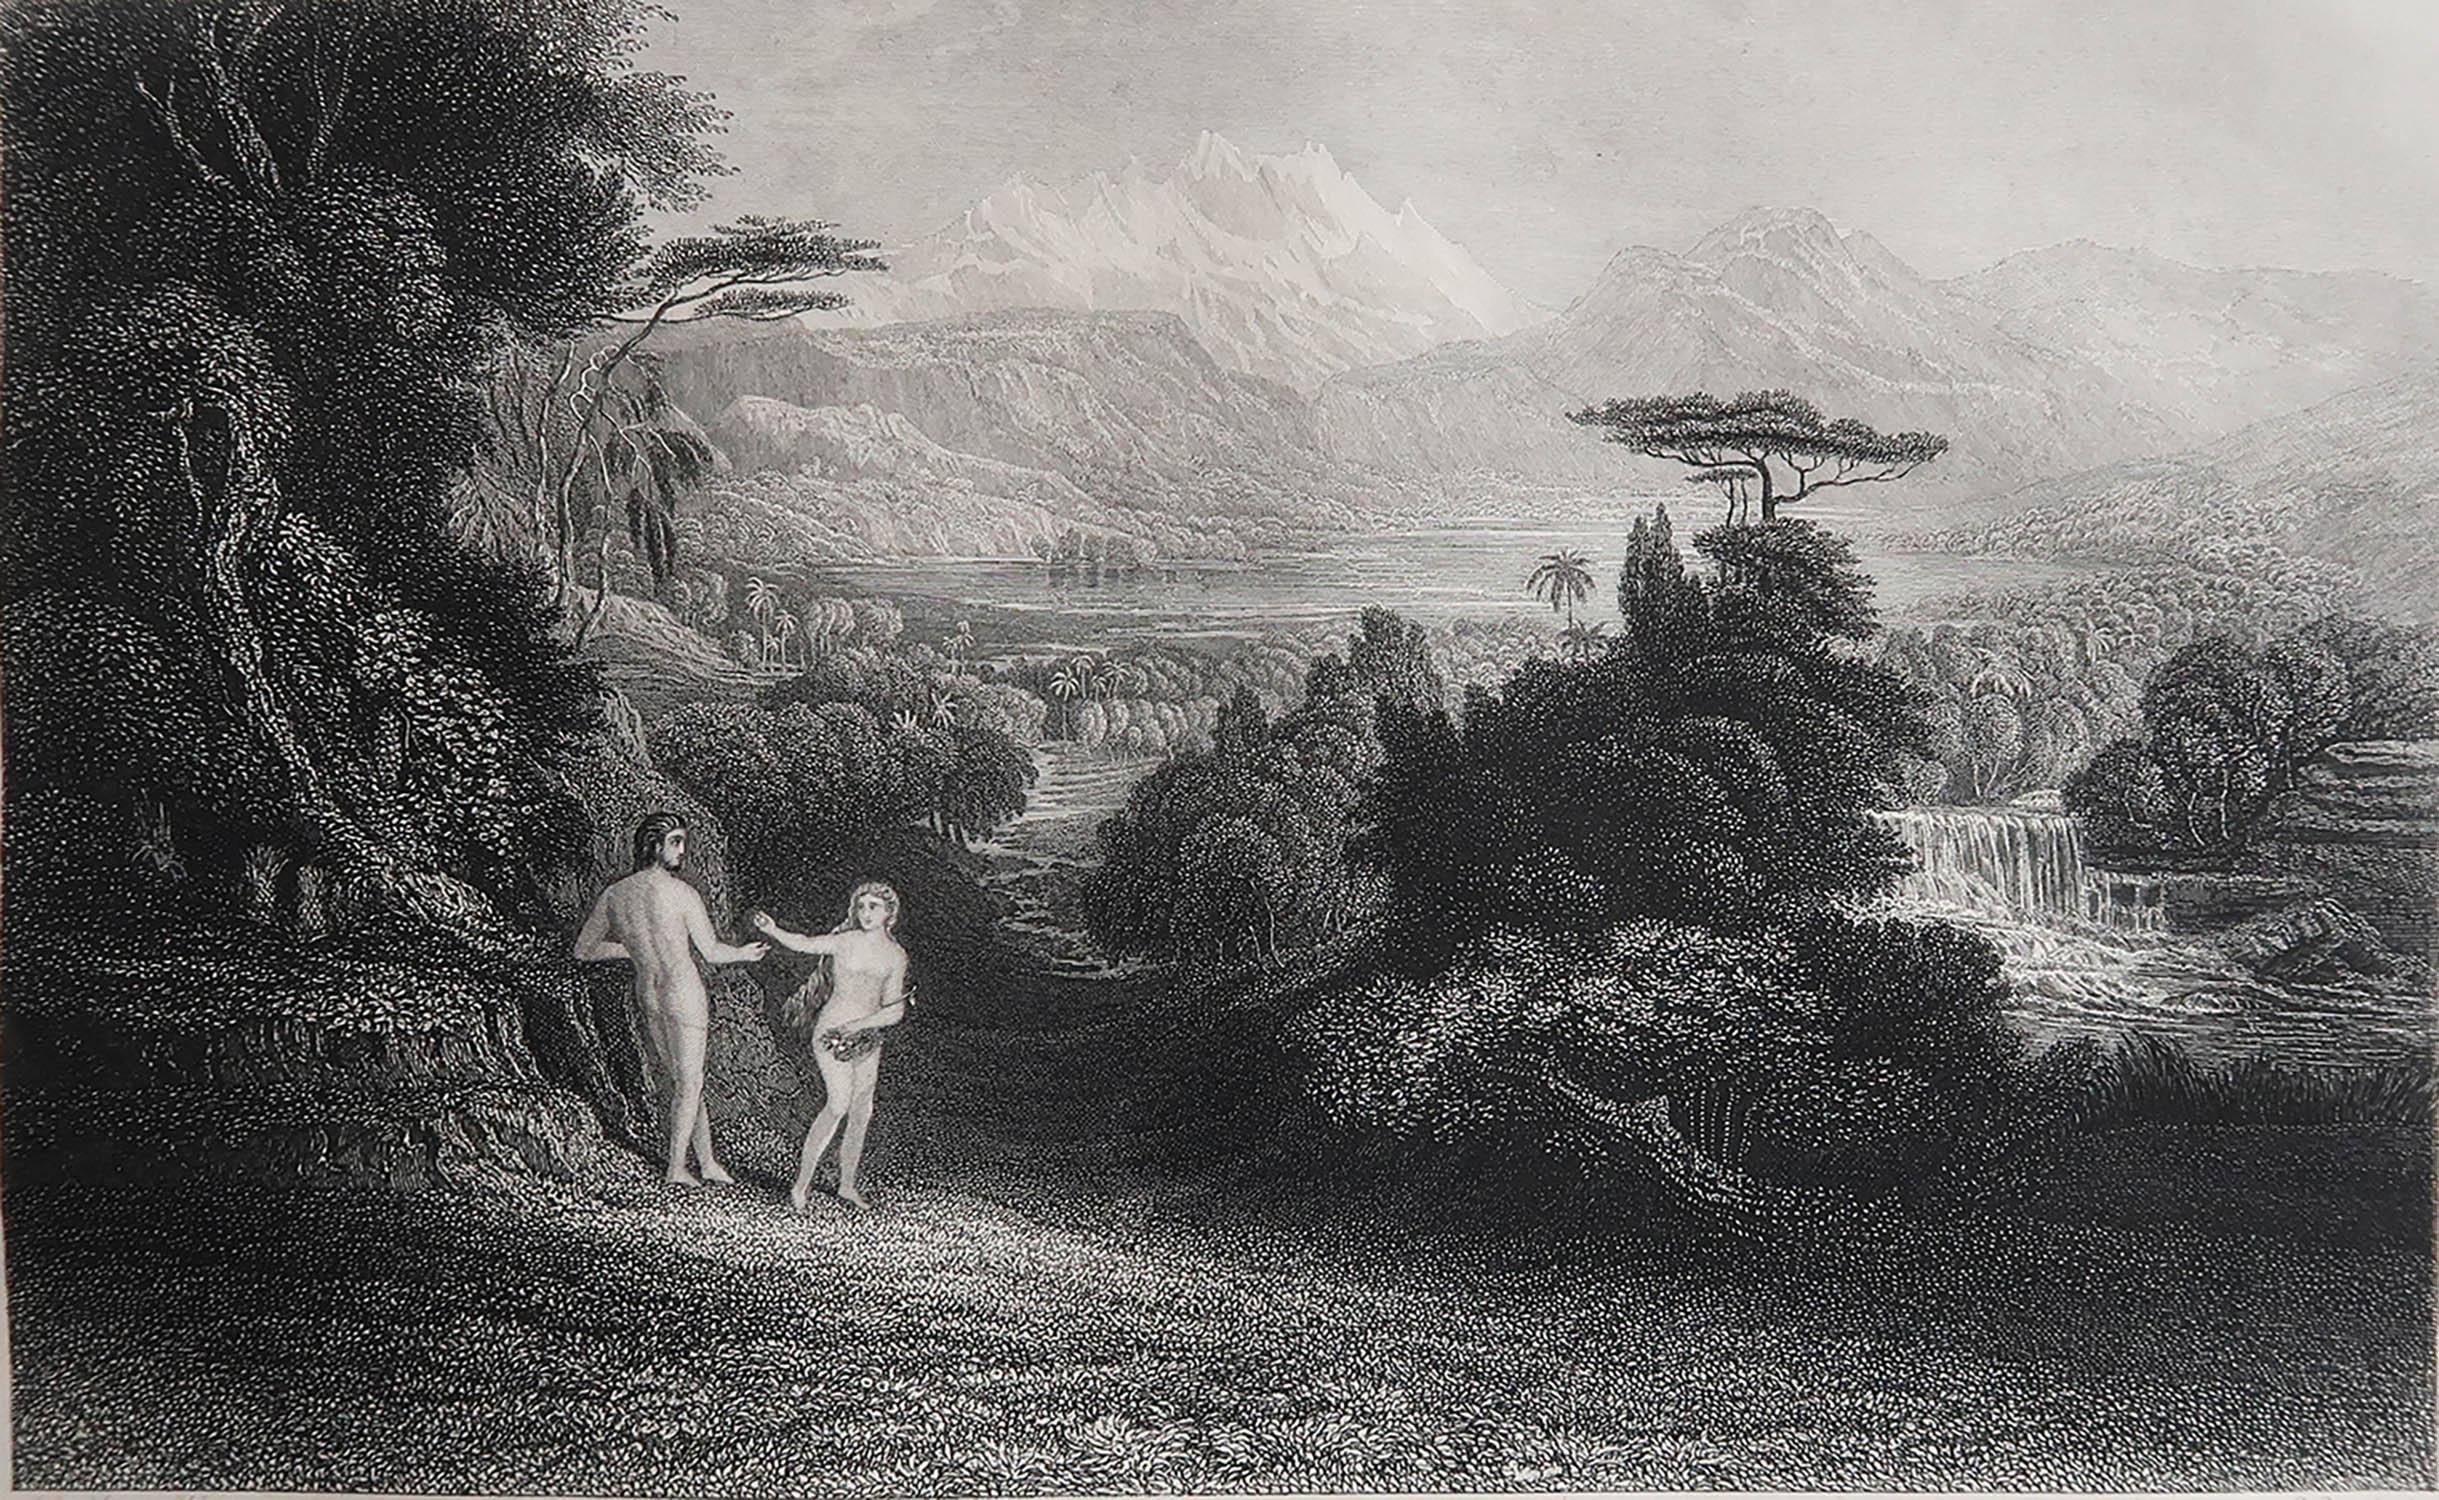 Sensational image by John Martin.

Steel engraving after a drawing by John Martin. 

Published by Sangster

Unframed.

Repair to a minor tear top edge of margin

